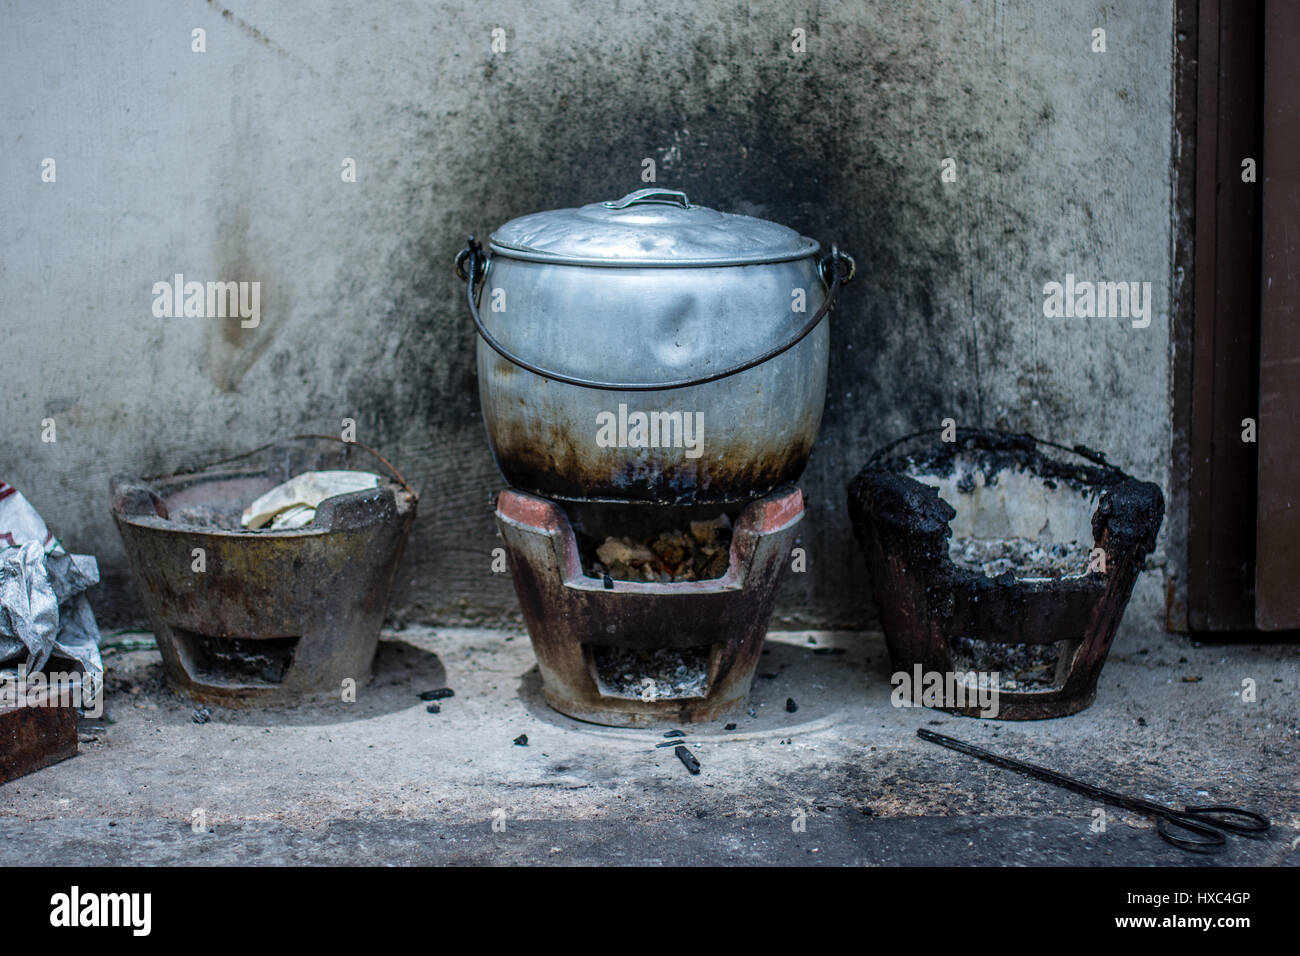 https://c8.alamy.com/comp/HXC4GP/basic-asian-cooking-stove-keeps-a-metal-pot-of-food-hot-out-the-back-HXC4GP.jpg